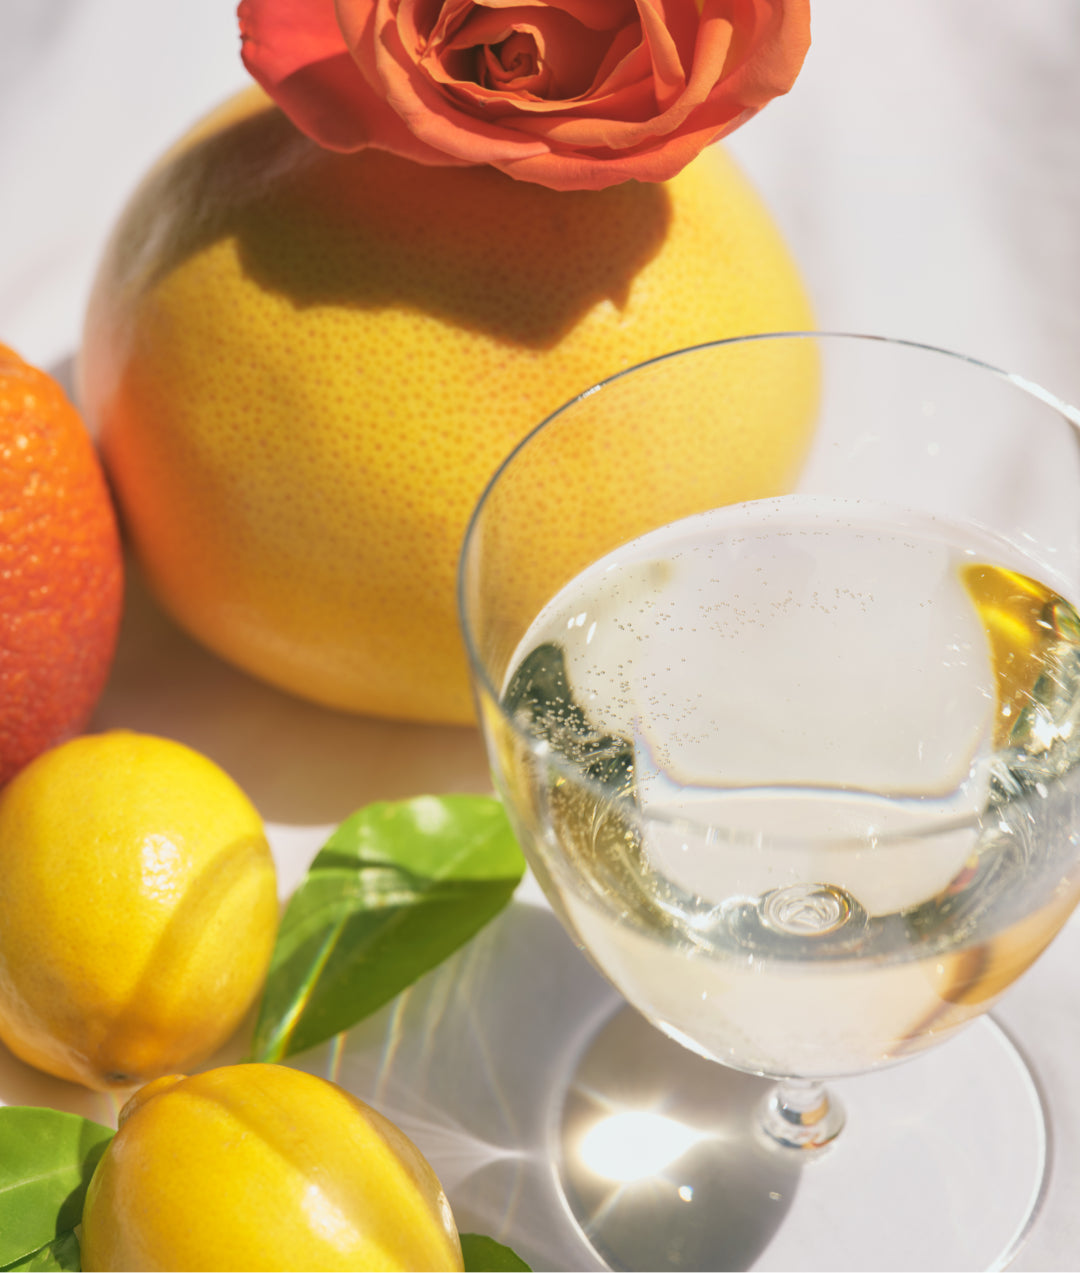 Overhead image of a glass of Sauvignon Blanc wine surrounded by grapefruit, lemon and roses